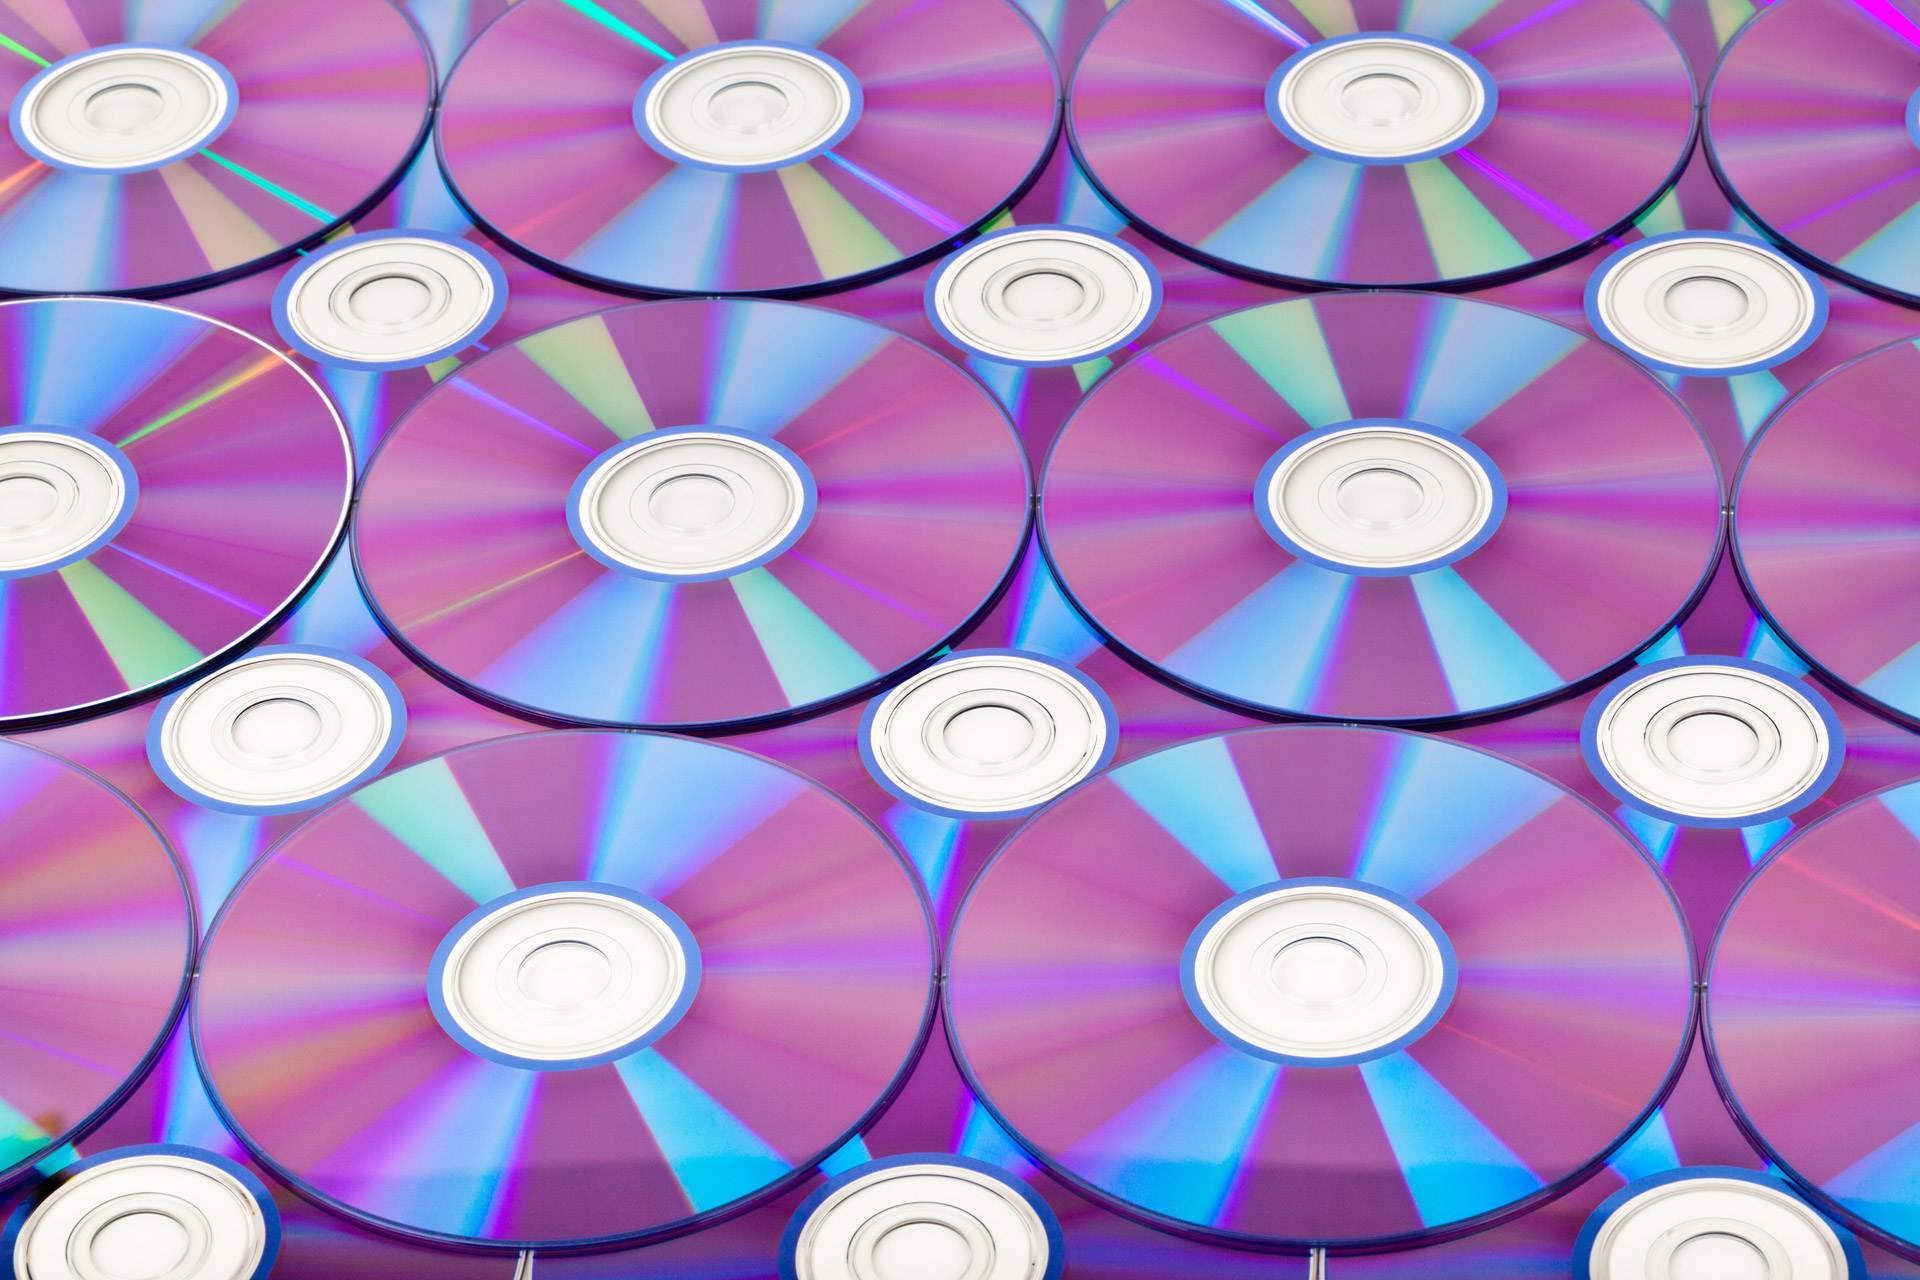 How to fit 1TB of data on one CD-sized disc | TechRadar